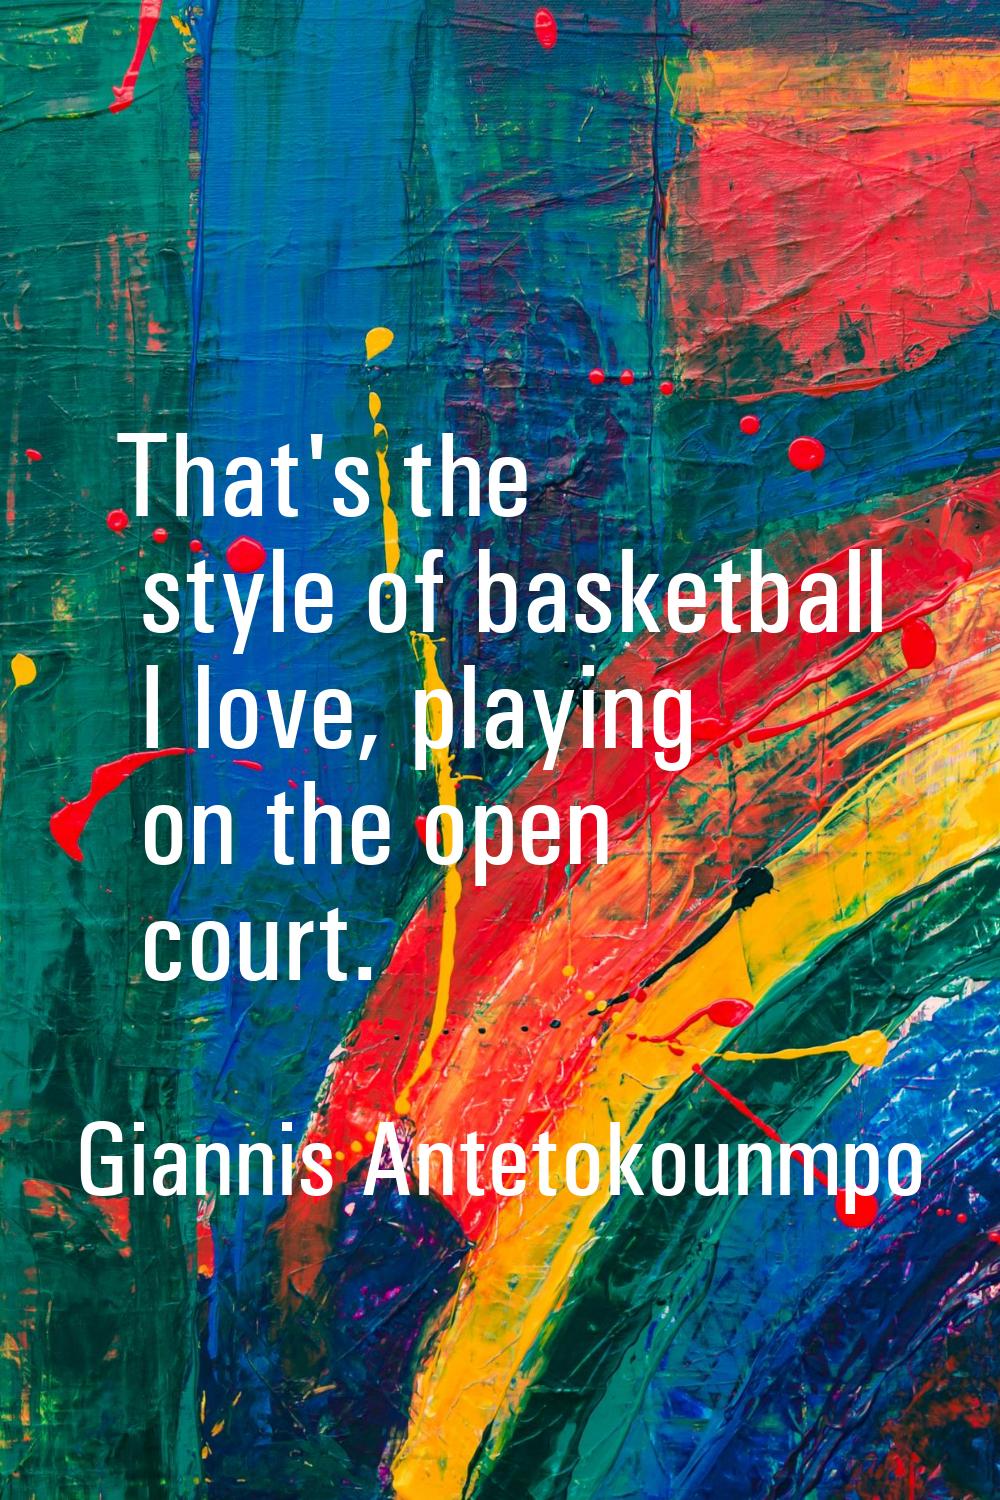 That's the style of basketball I love, playing on the open court.